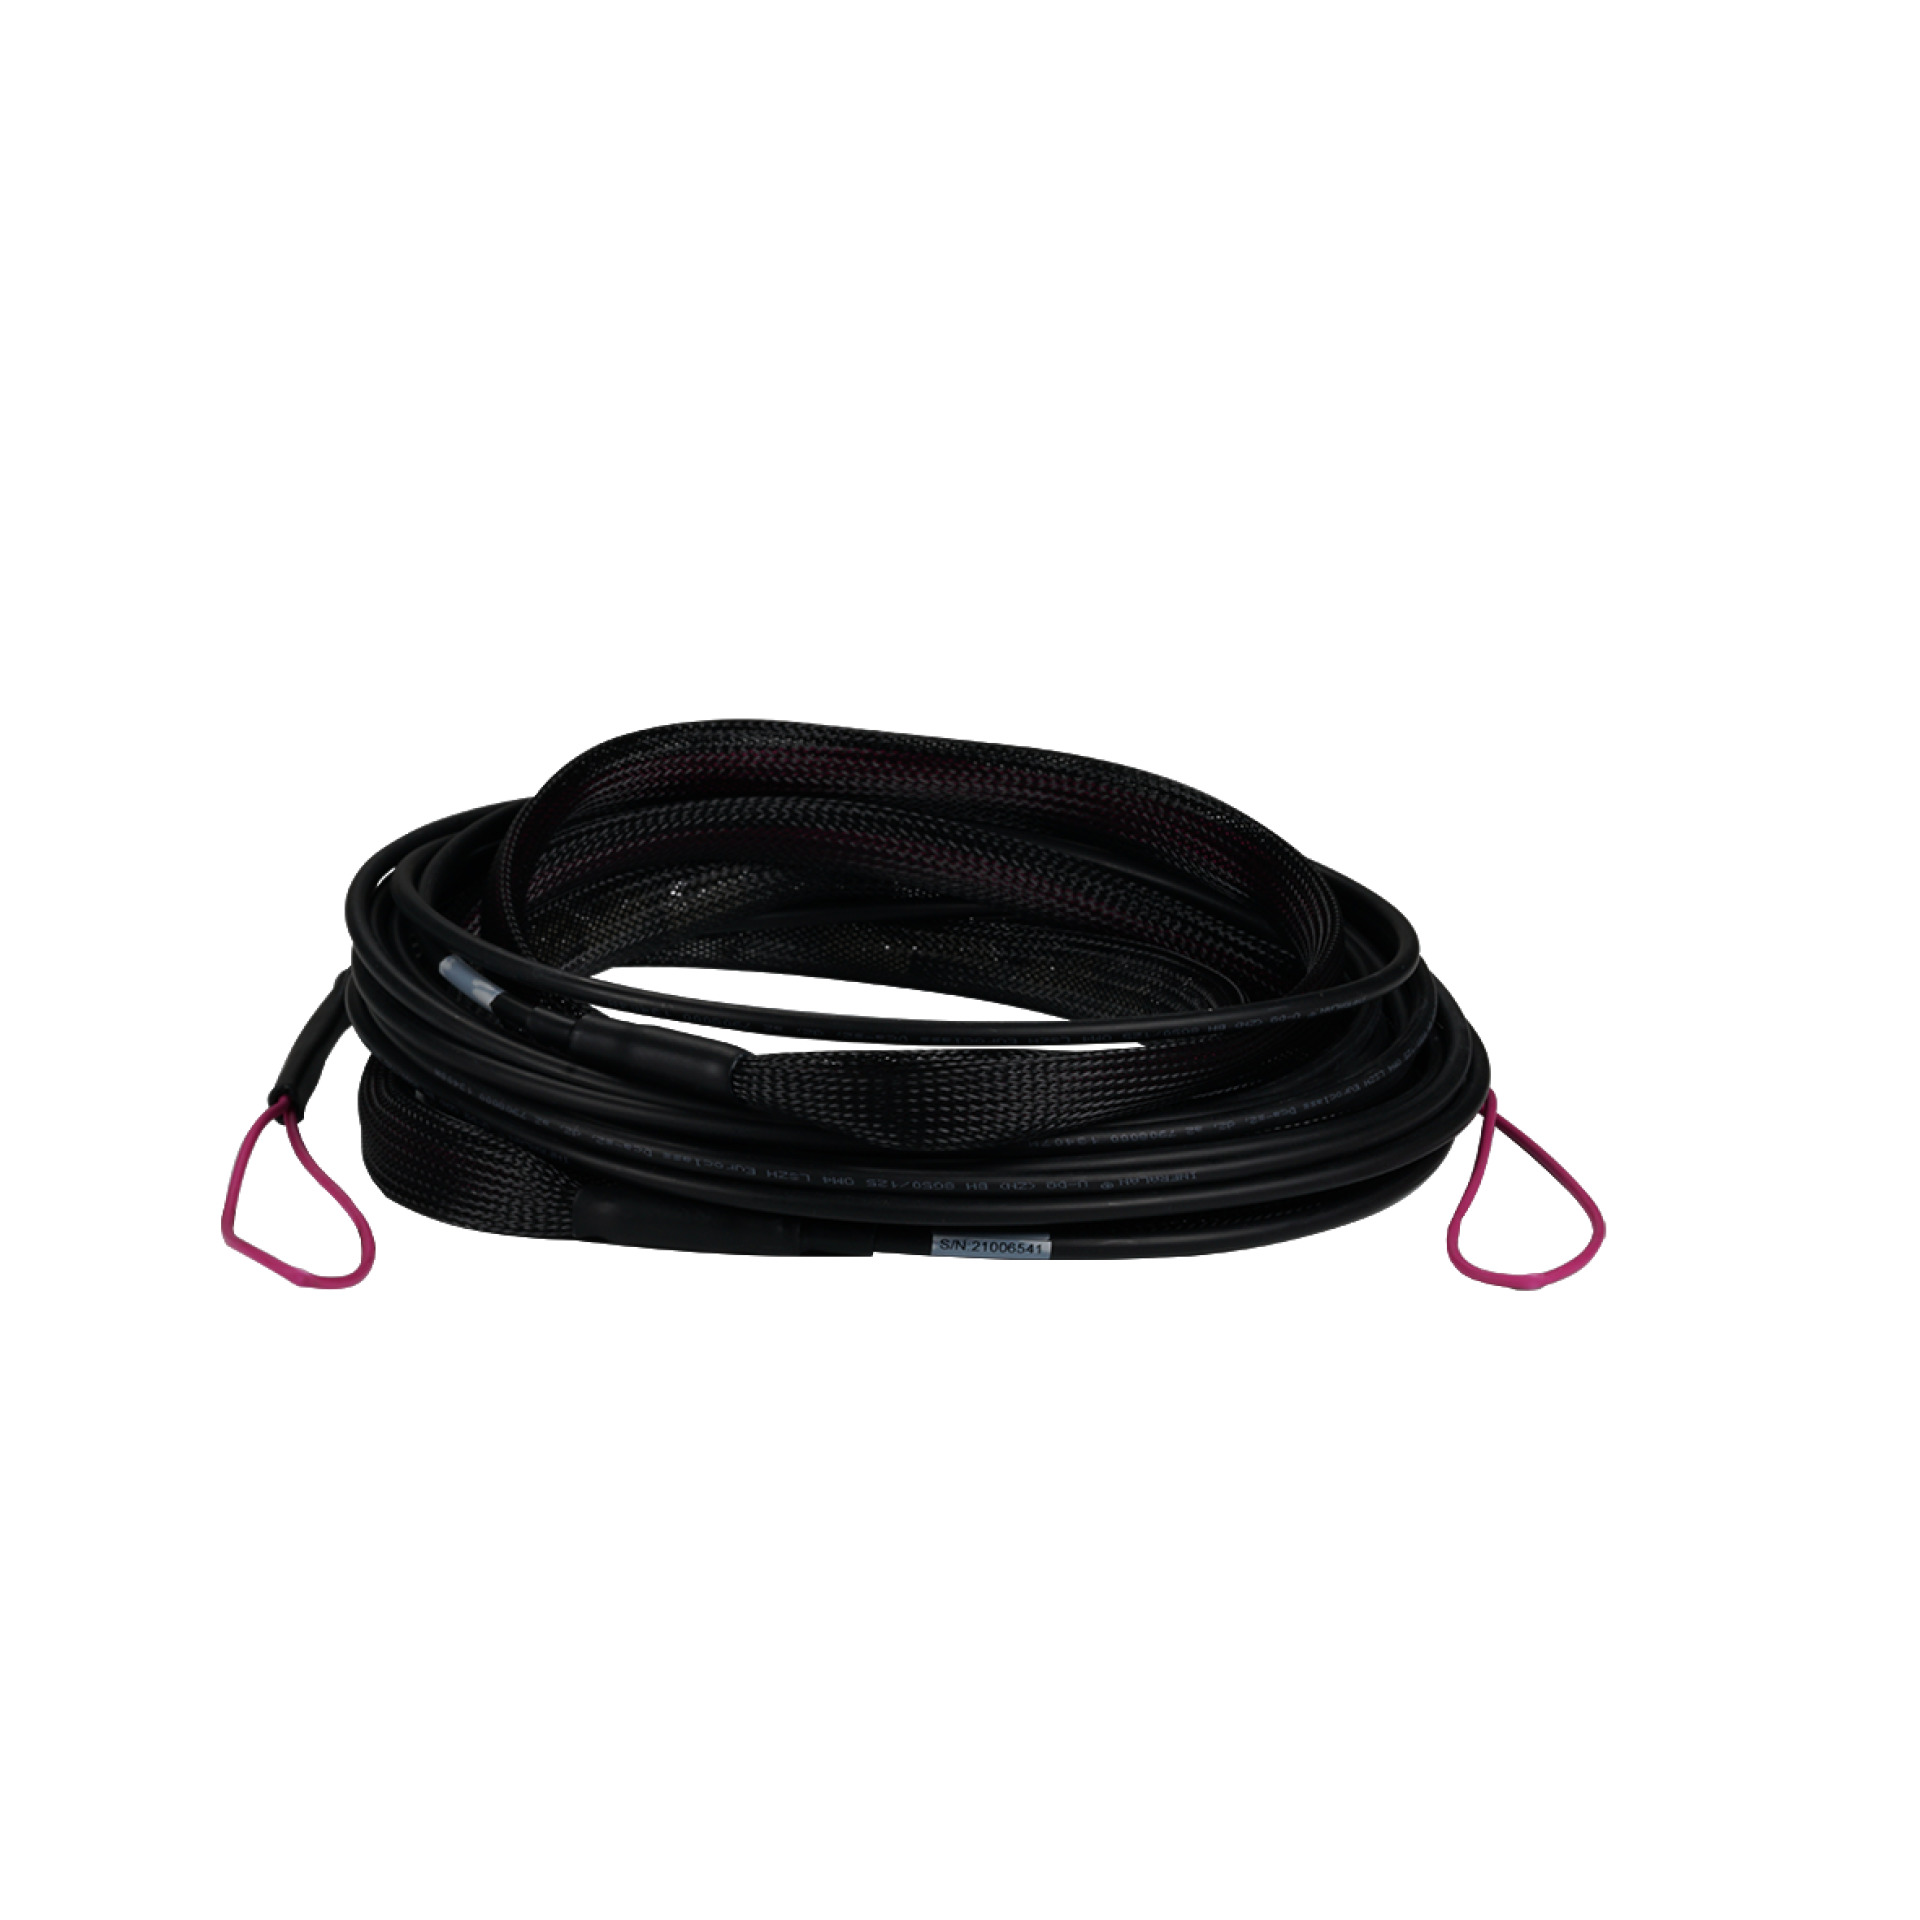 Trunk cable U-DQ(ZN)BH 4G 50/125, SC/SC OM4 160m